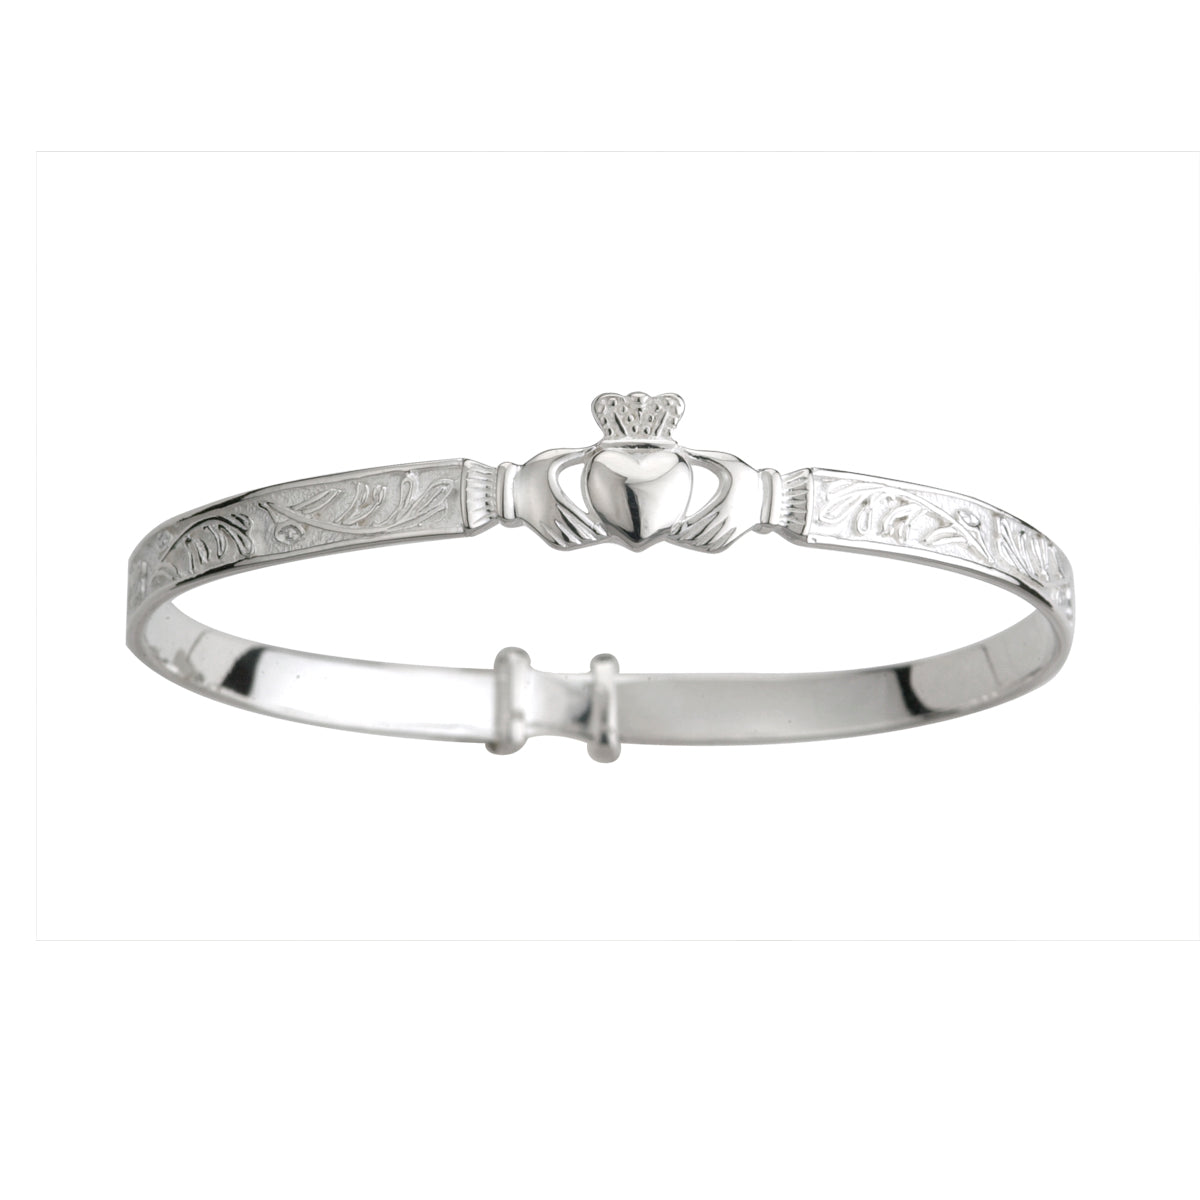 sterling silver claddagh celtic baby bangle s5268 from Solvar